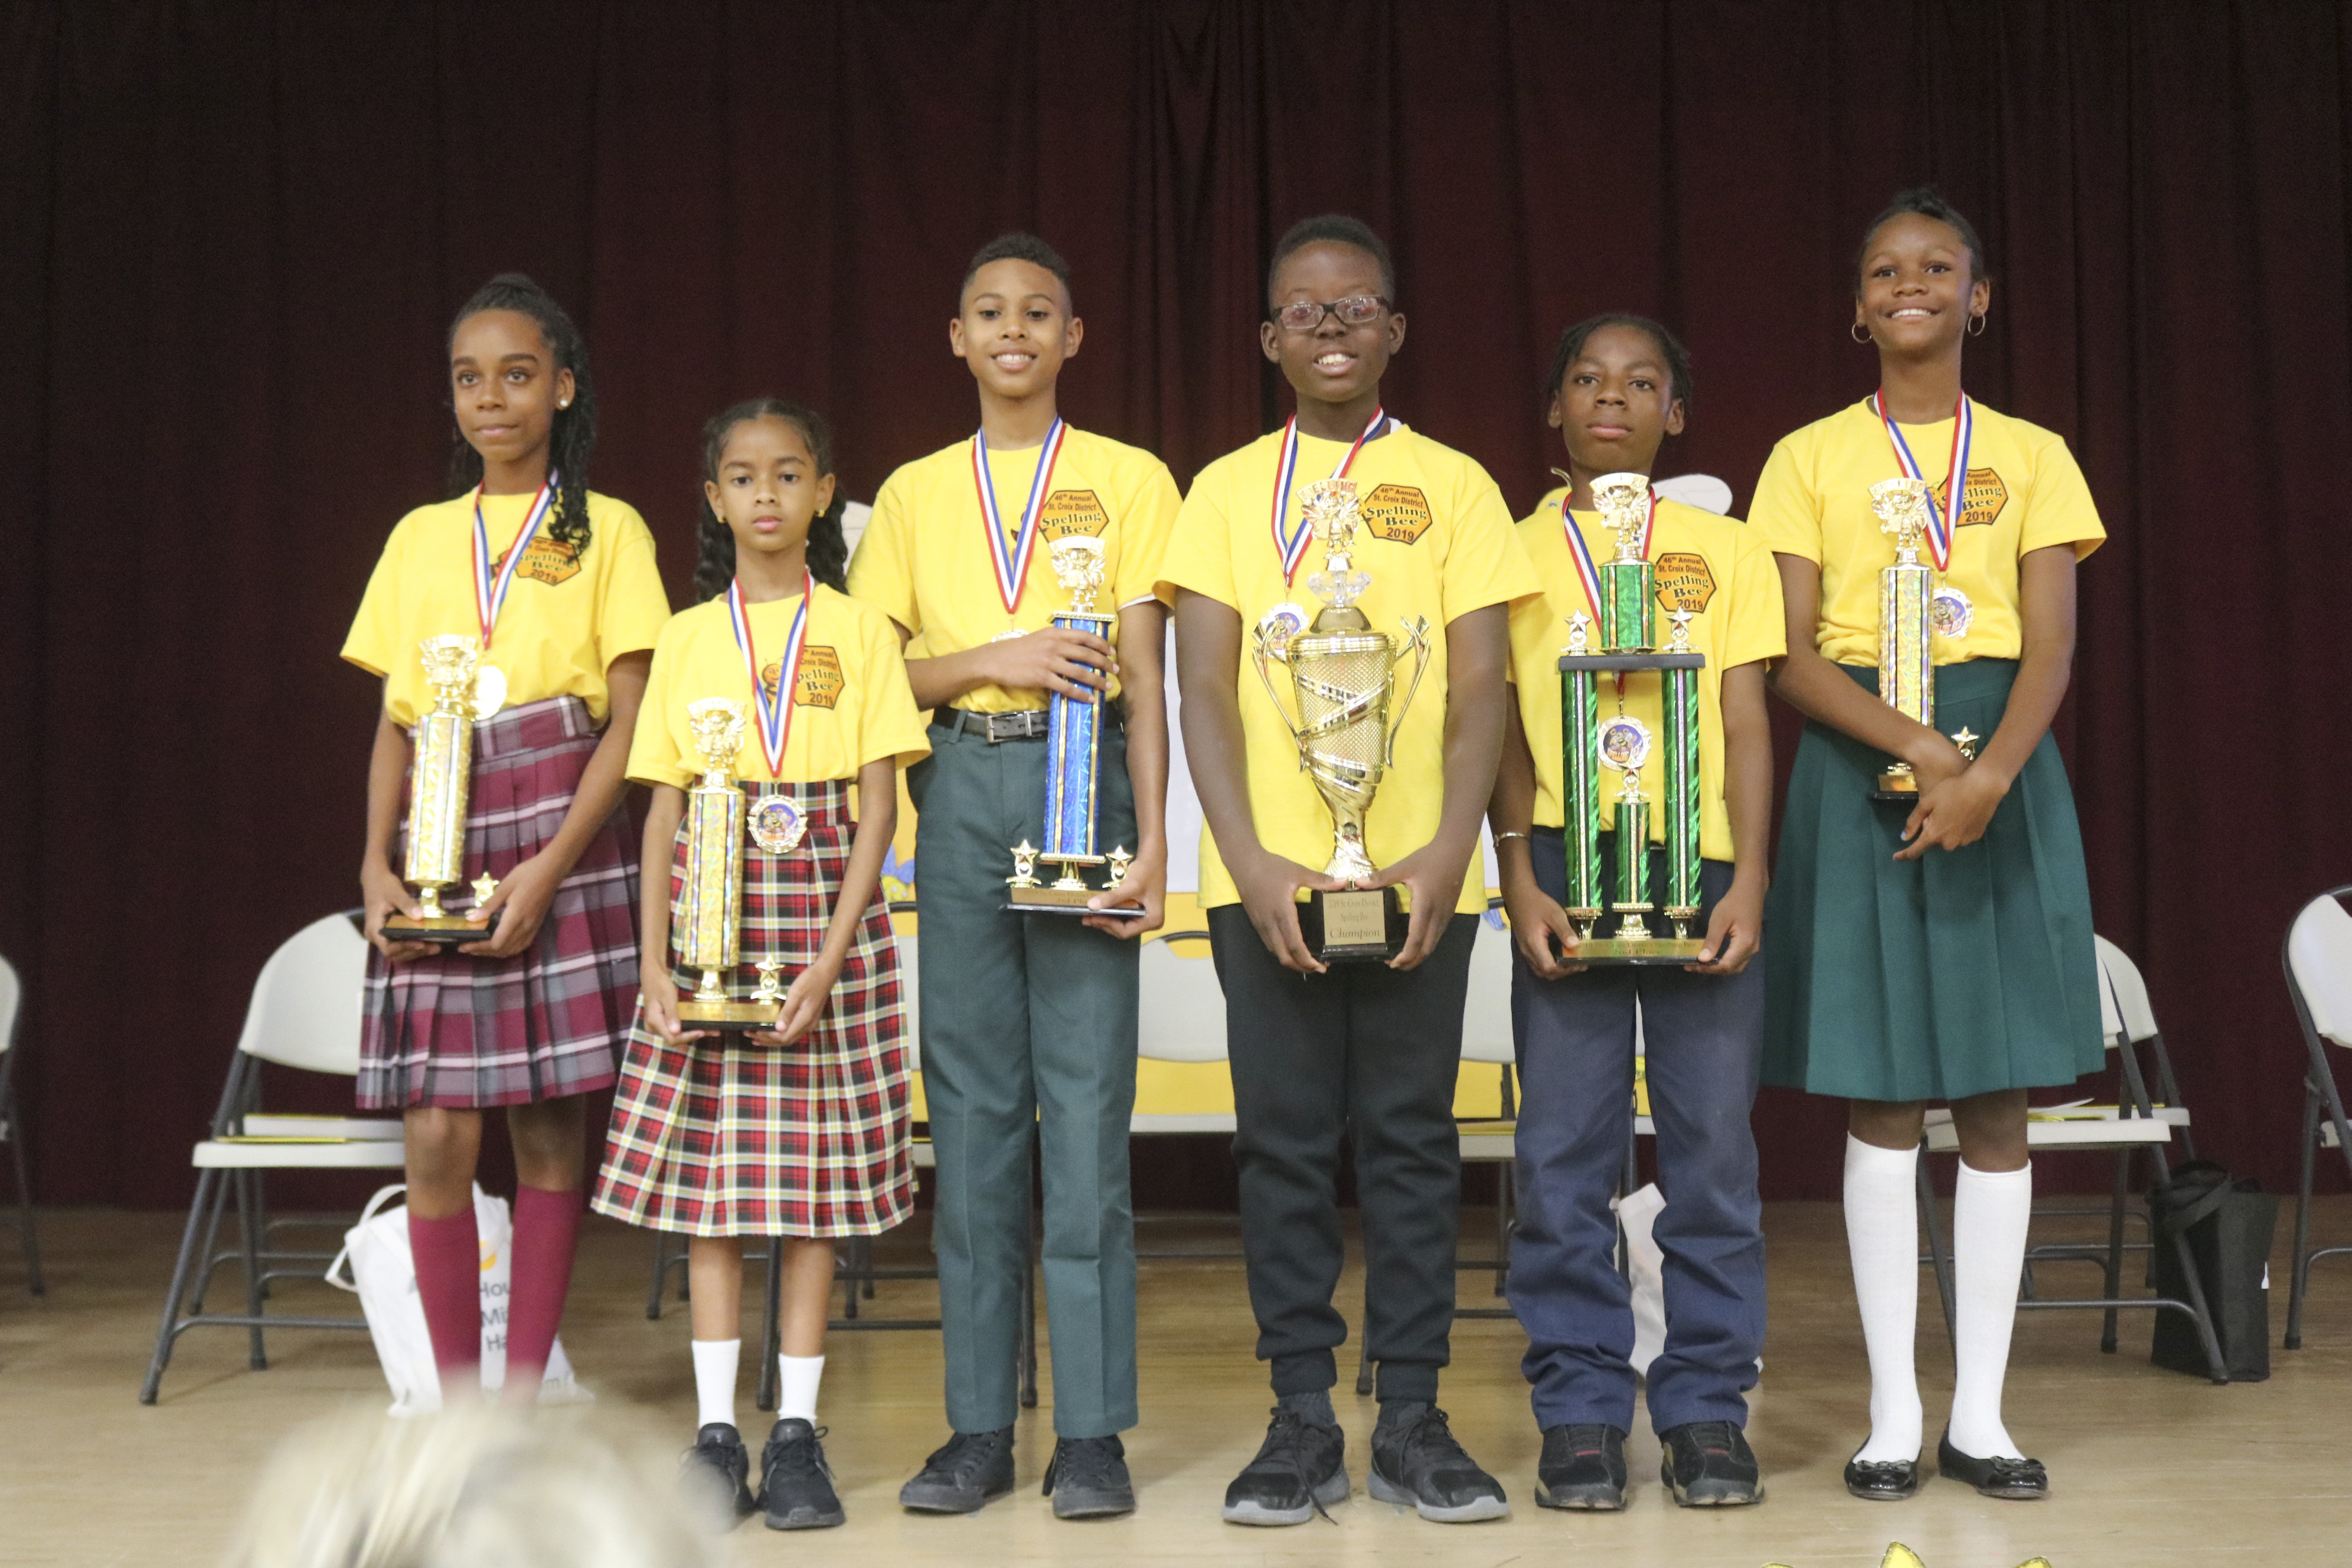 St. Croix's Michael Atwell Wins 46th Annual Spelling Bee At John Woodson Jr. High